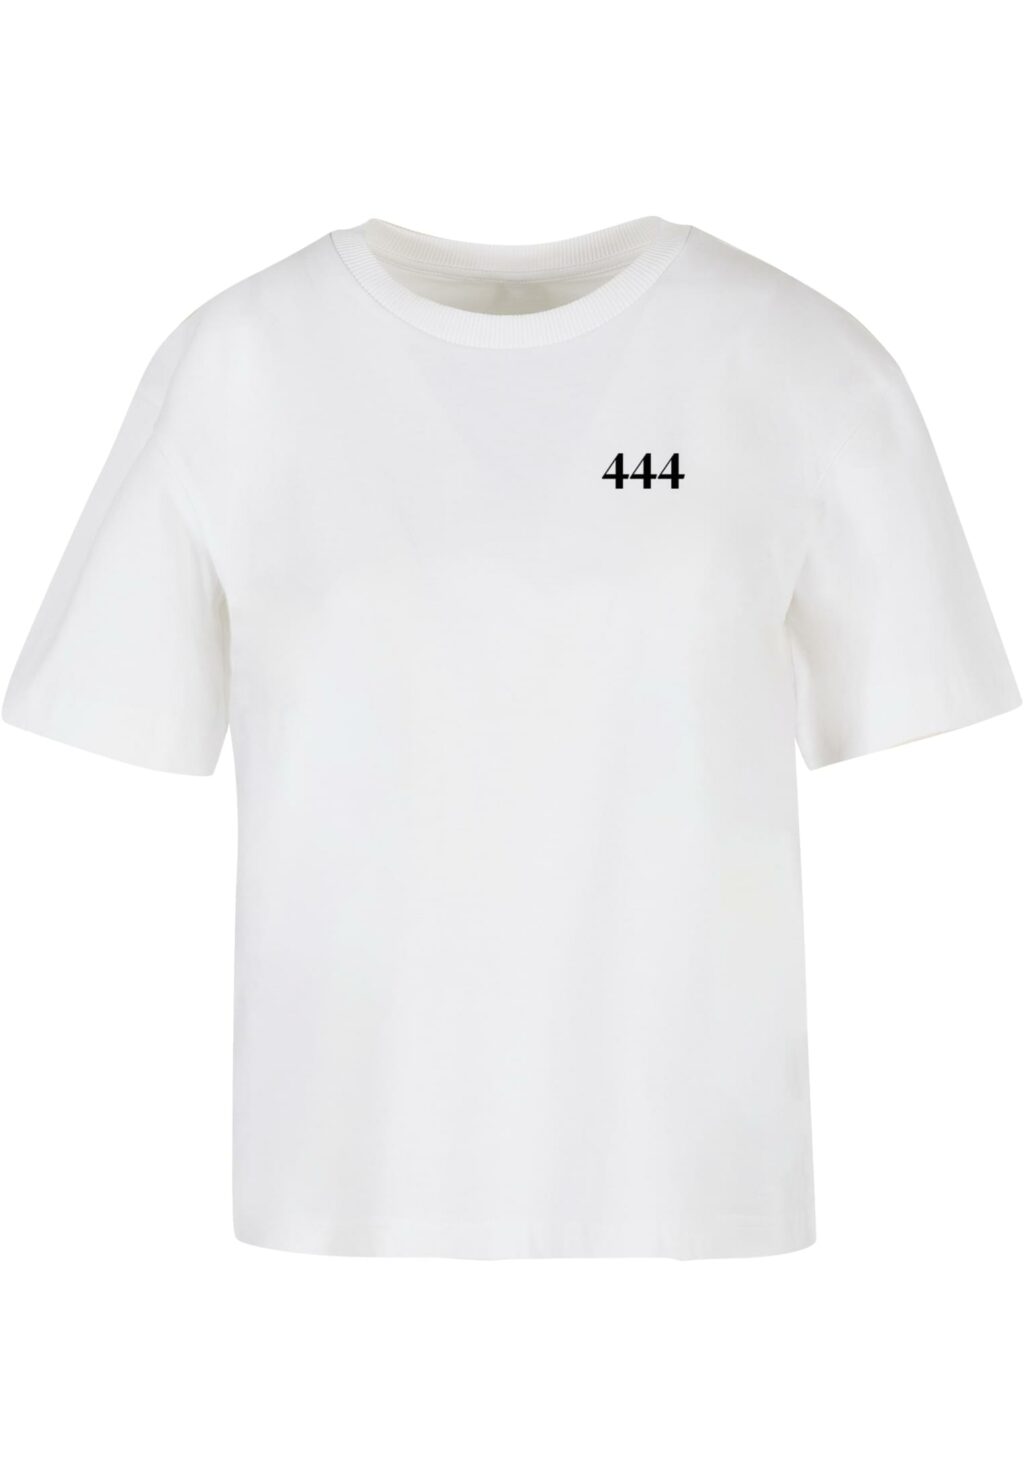 444 Protection Tee white MST075